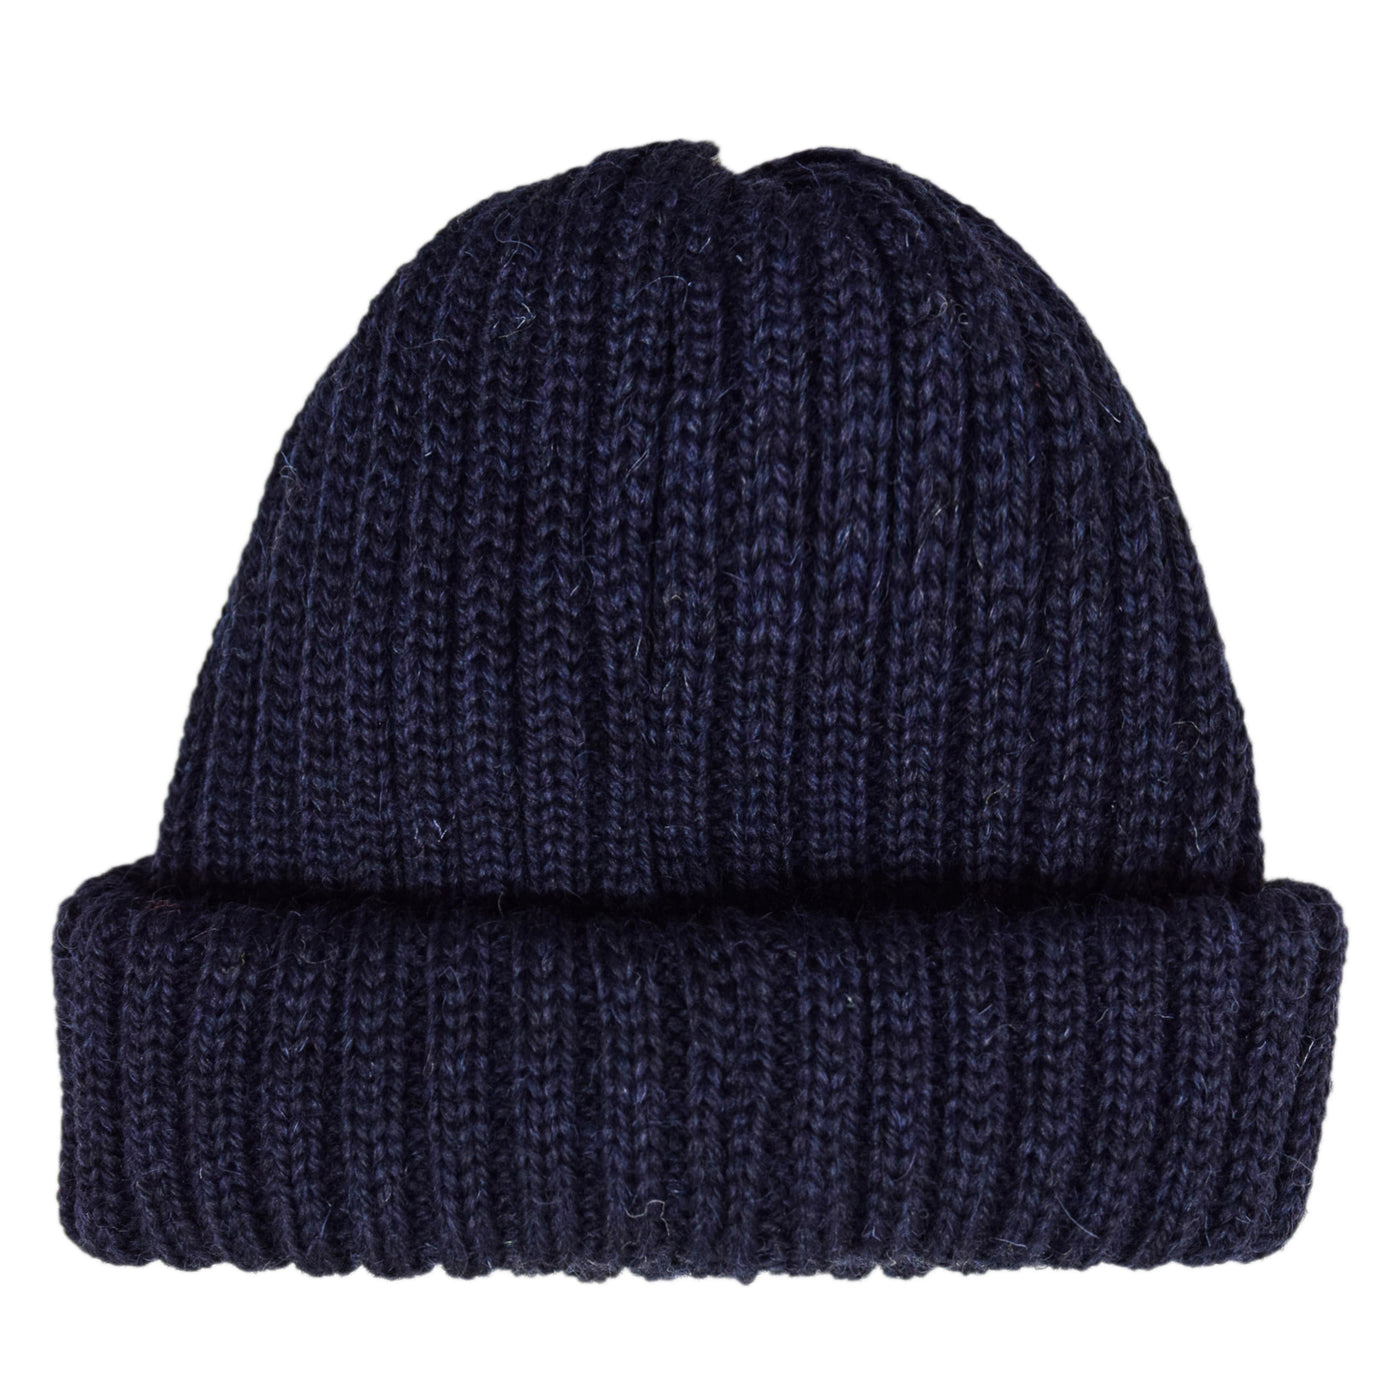 Connor Reilly Wool Watch Cap Navy Made In England Front